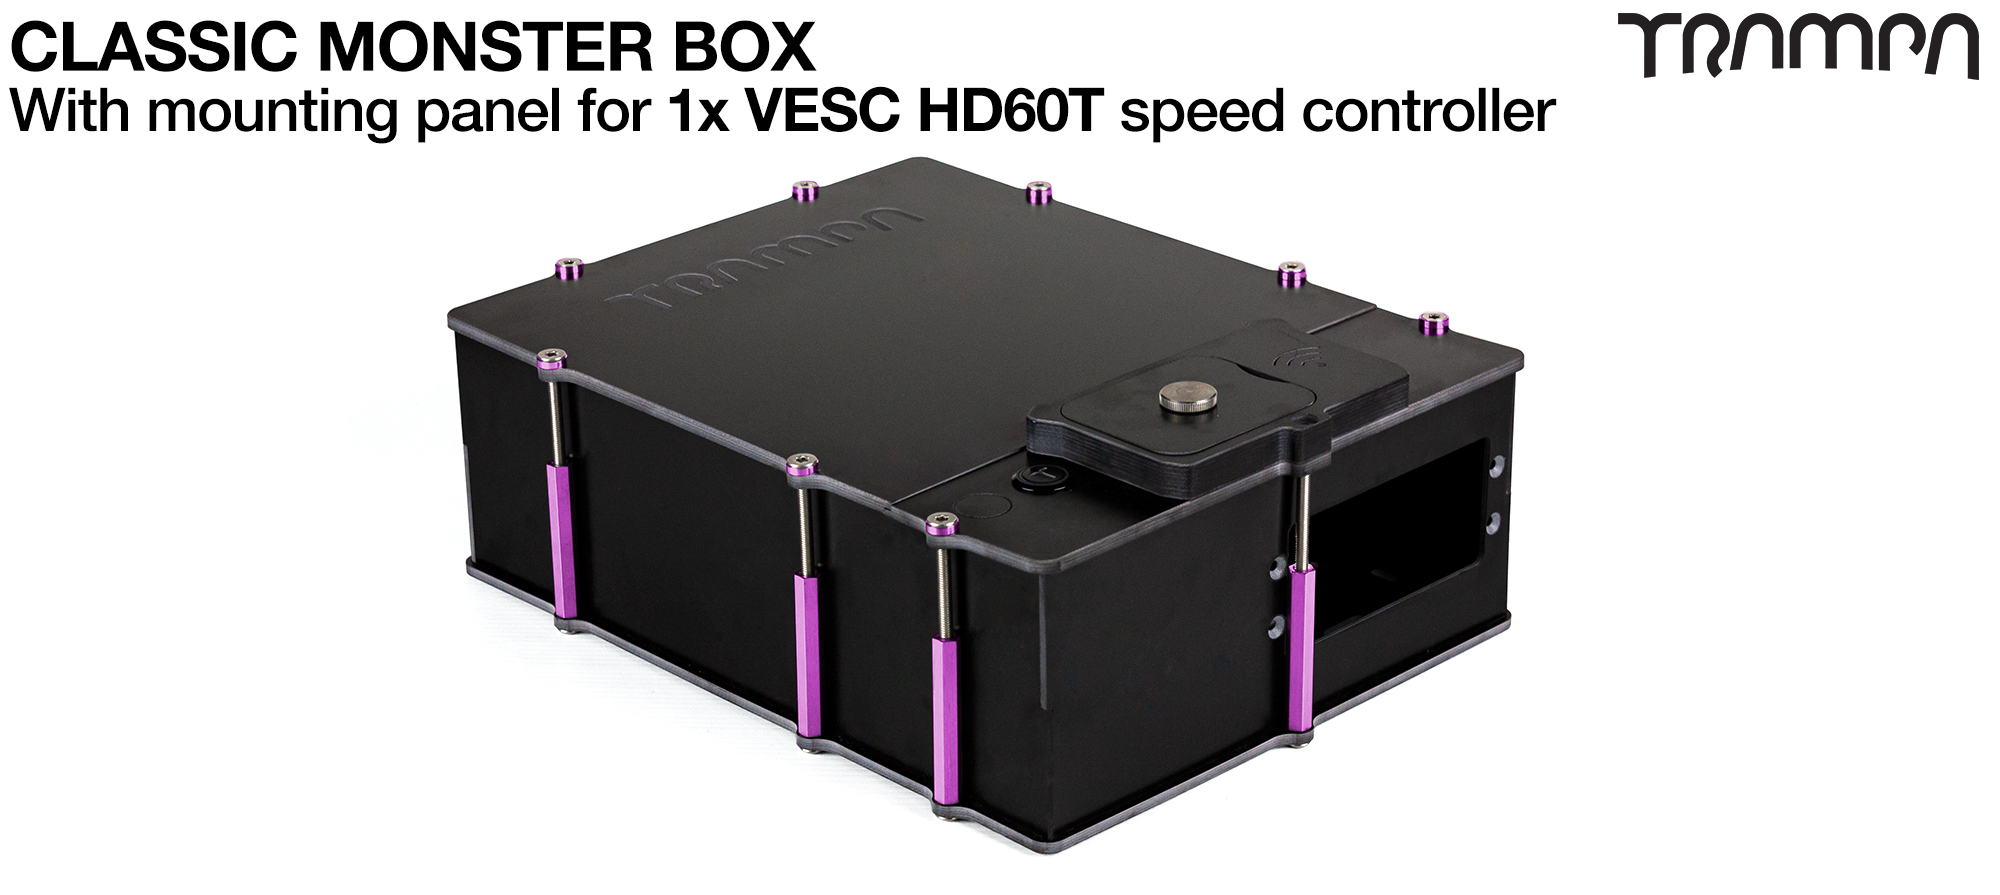 CLASSIC Monster Box - Panel to fit 1x VESC HD-60T (+£150)